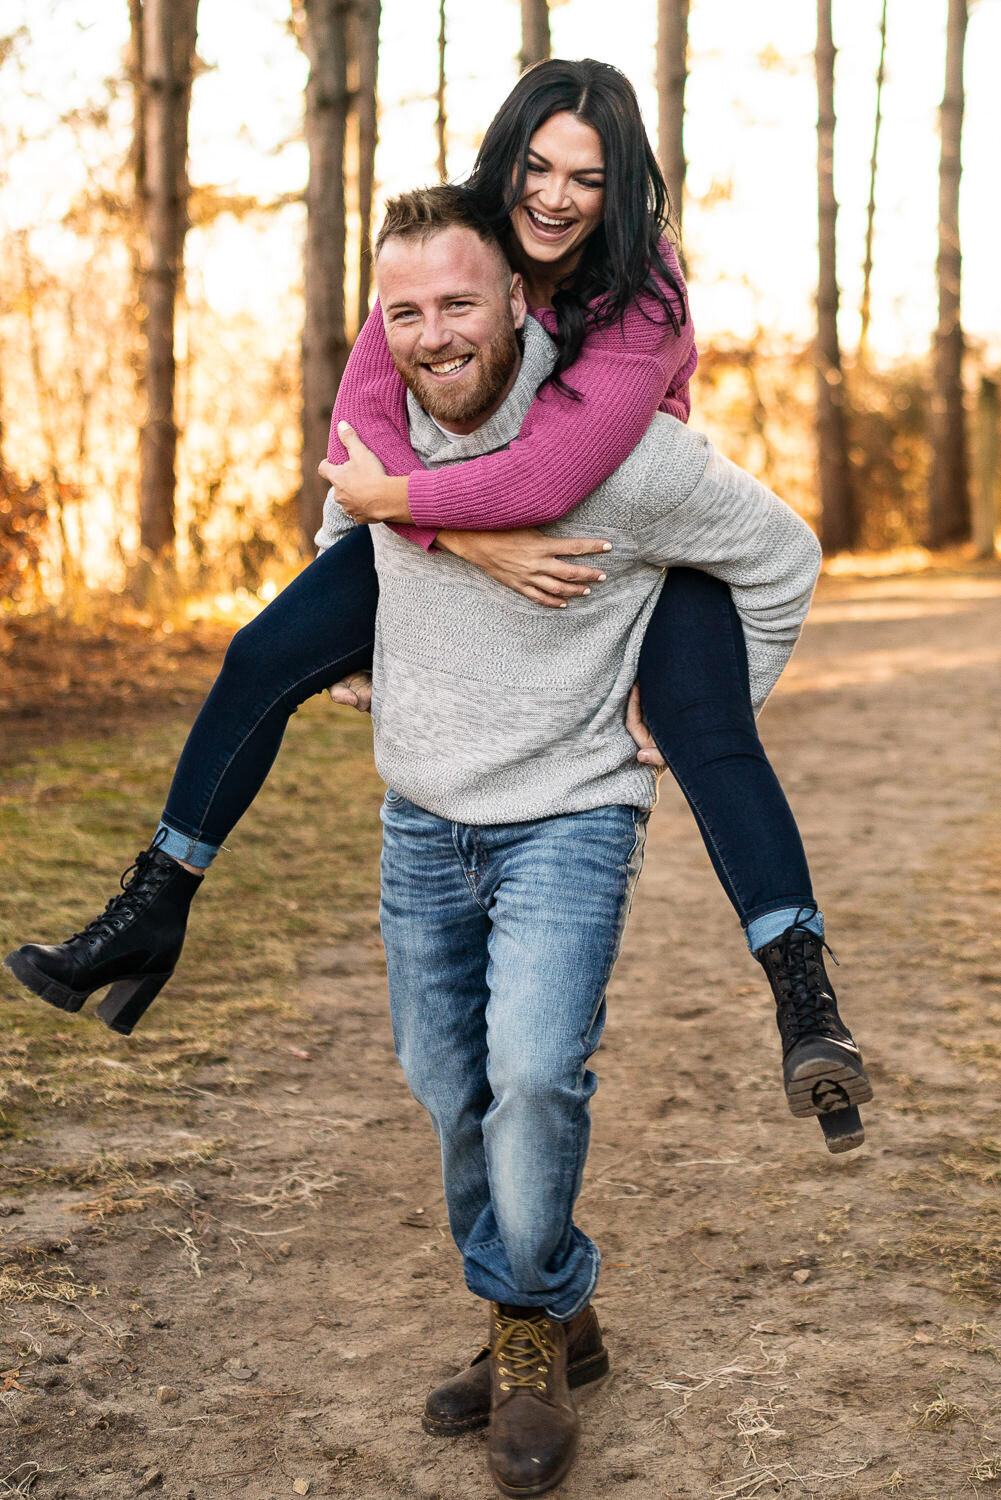 Amy and Travis - Minnesota Engagement Photography - Lebanon Hills Regional Park - RKH Images (435 of 606)